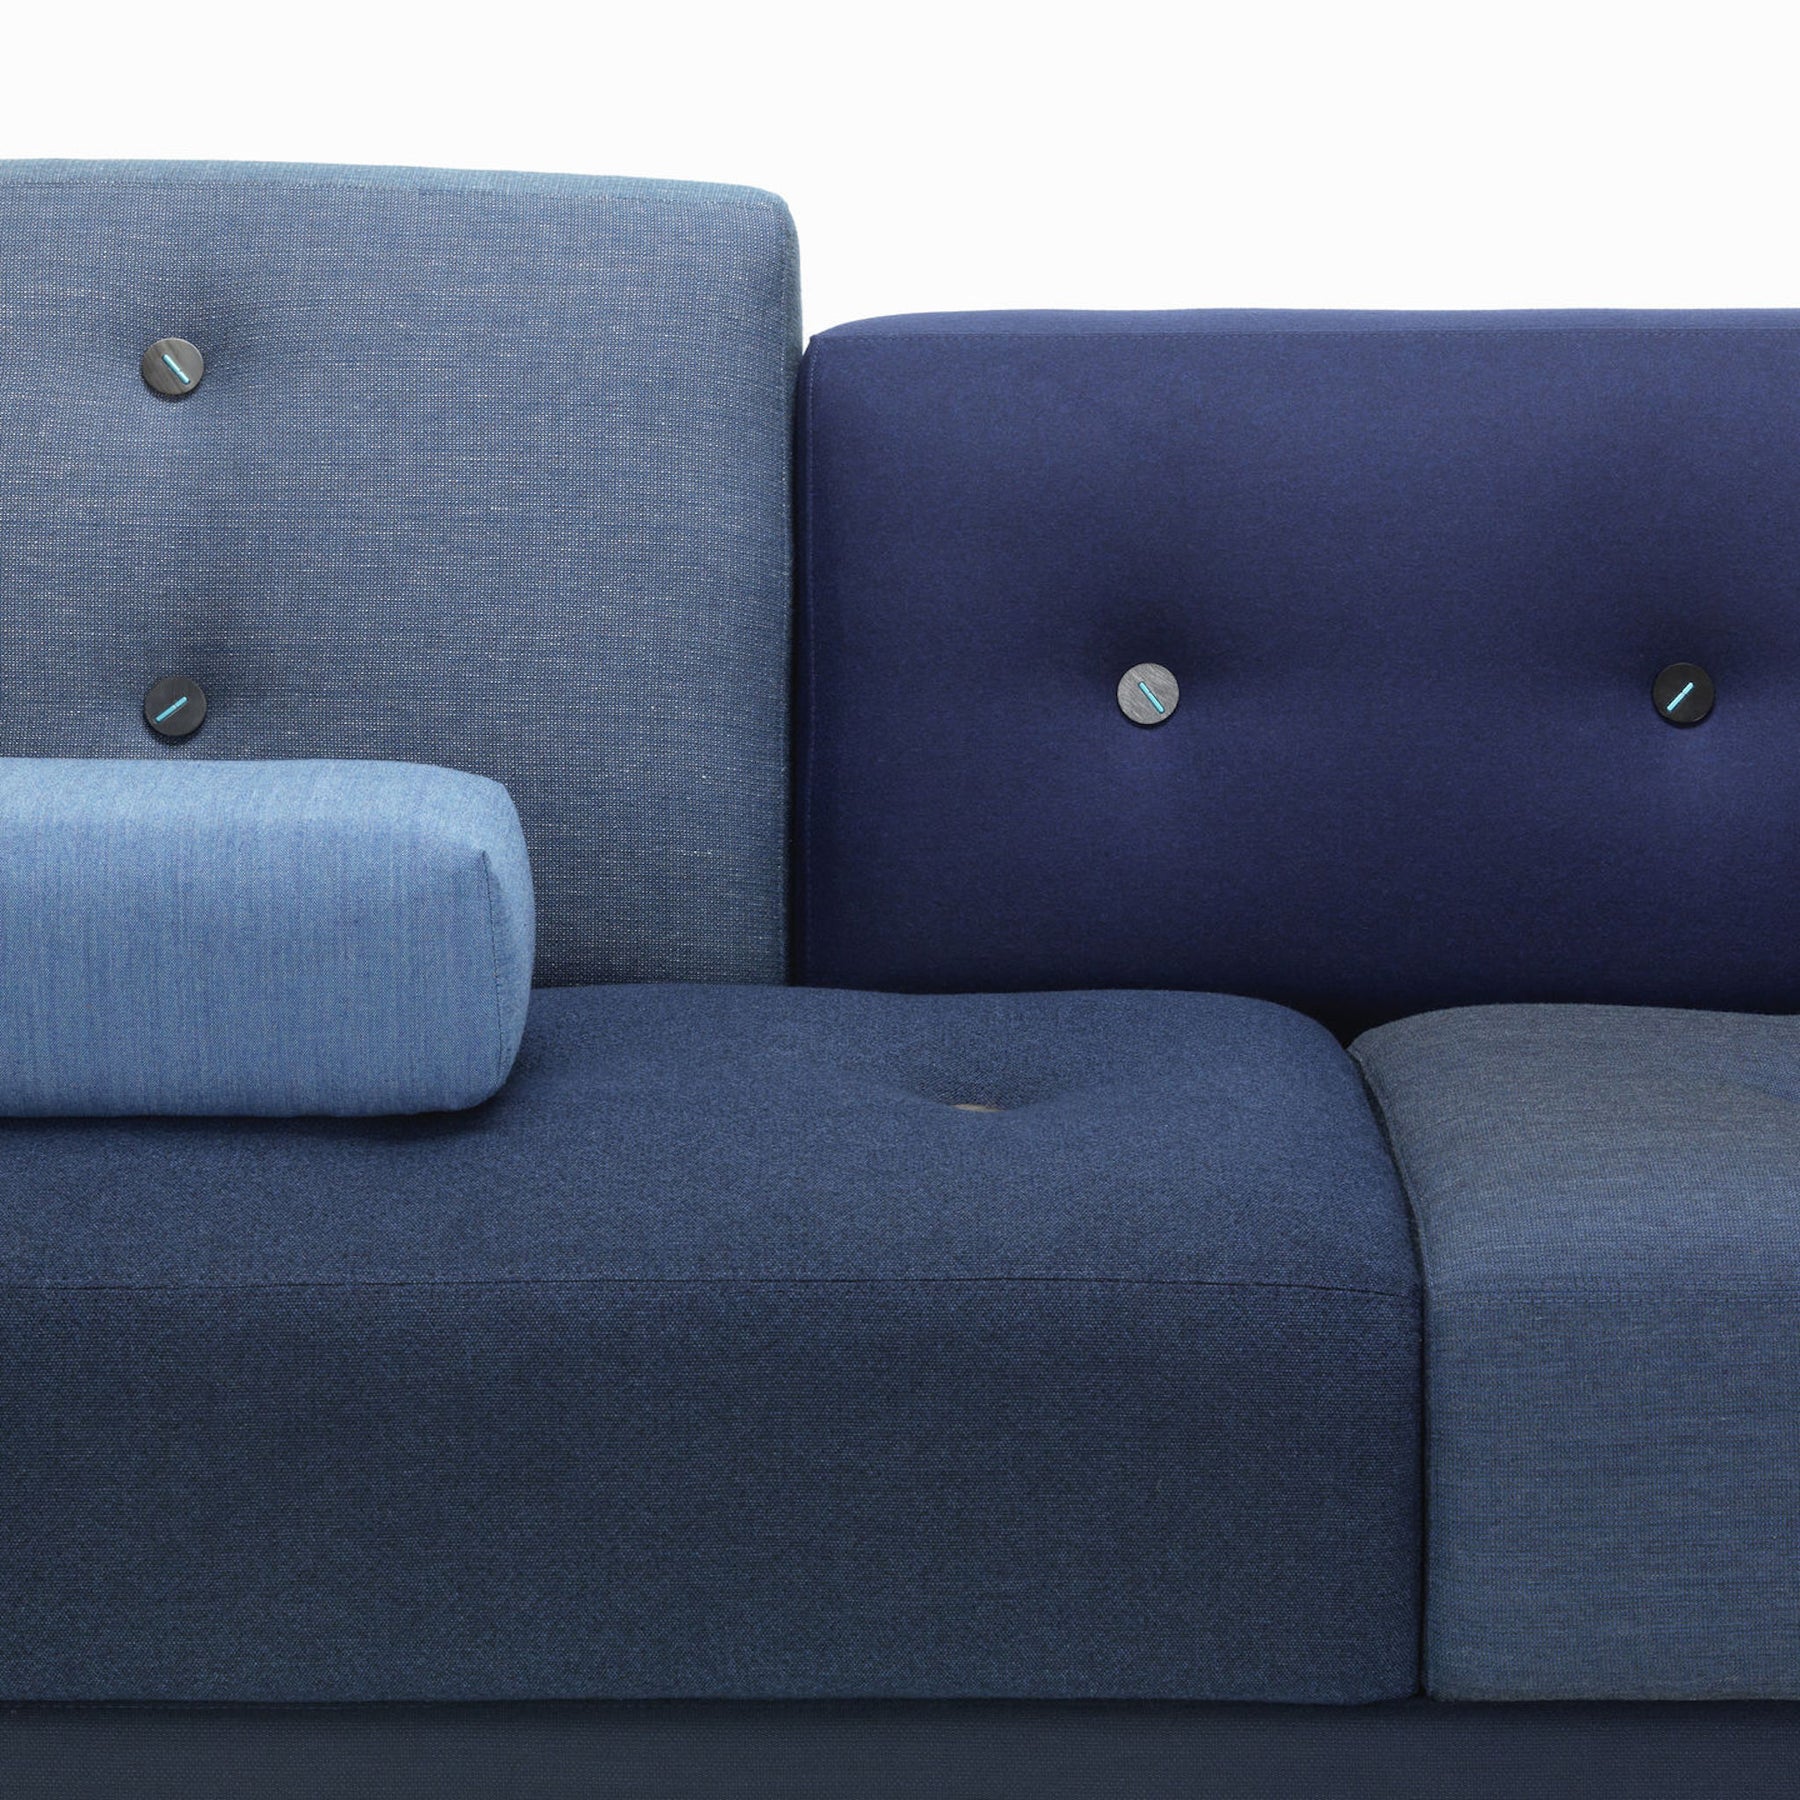 Vitra Polder Sofa by Hella Jongerius Antarctic Blues  Mid Section with Arm Pillow Detail